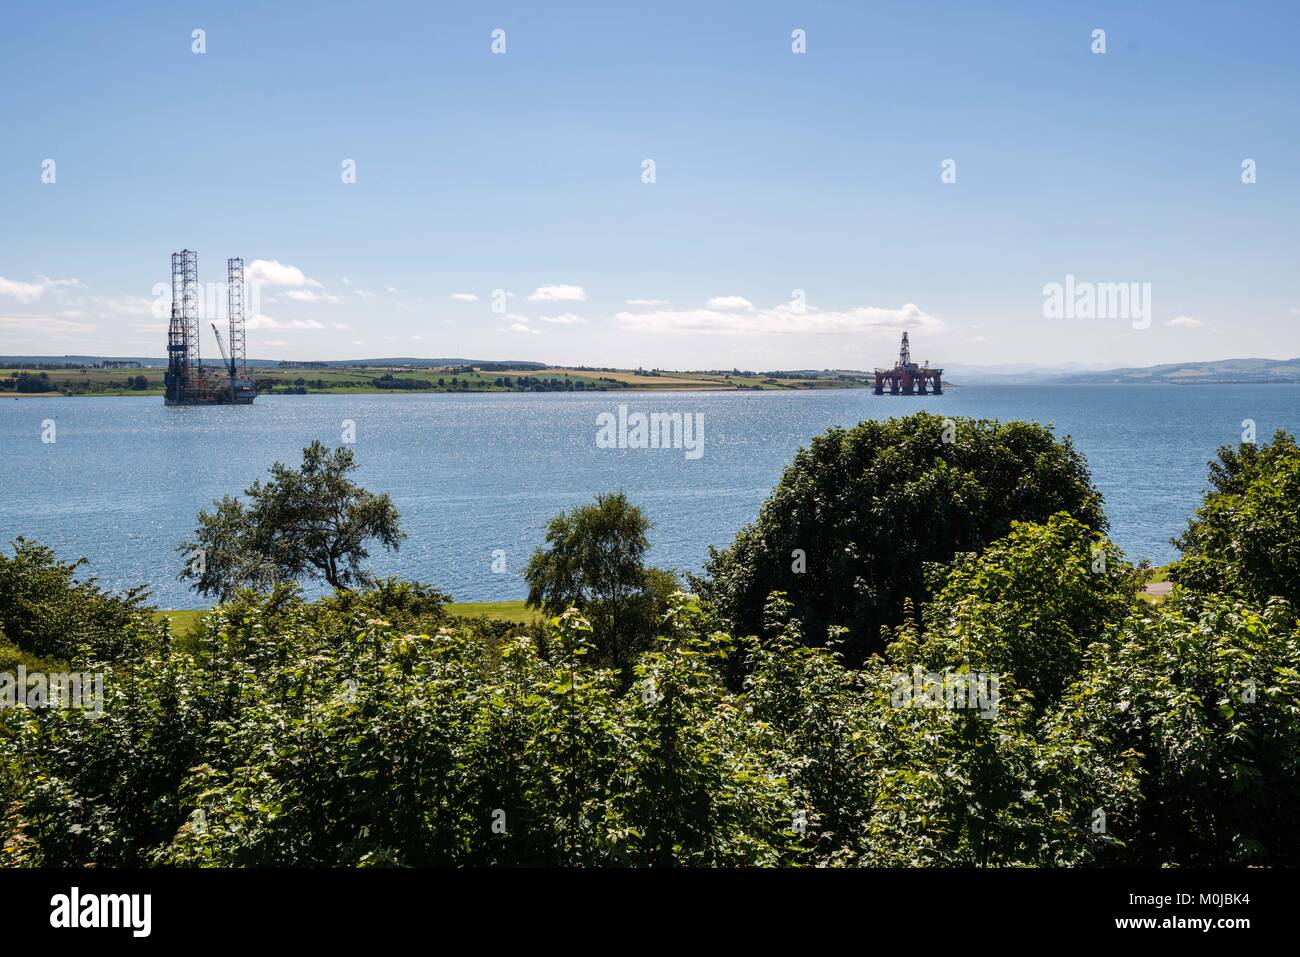 North Sea oil and gas rigs lined up in the sheltered waters of the Cromarty Firth for maintenance and refurbishment. Stock Photo